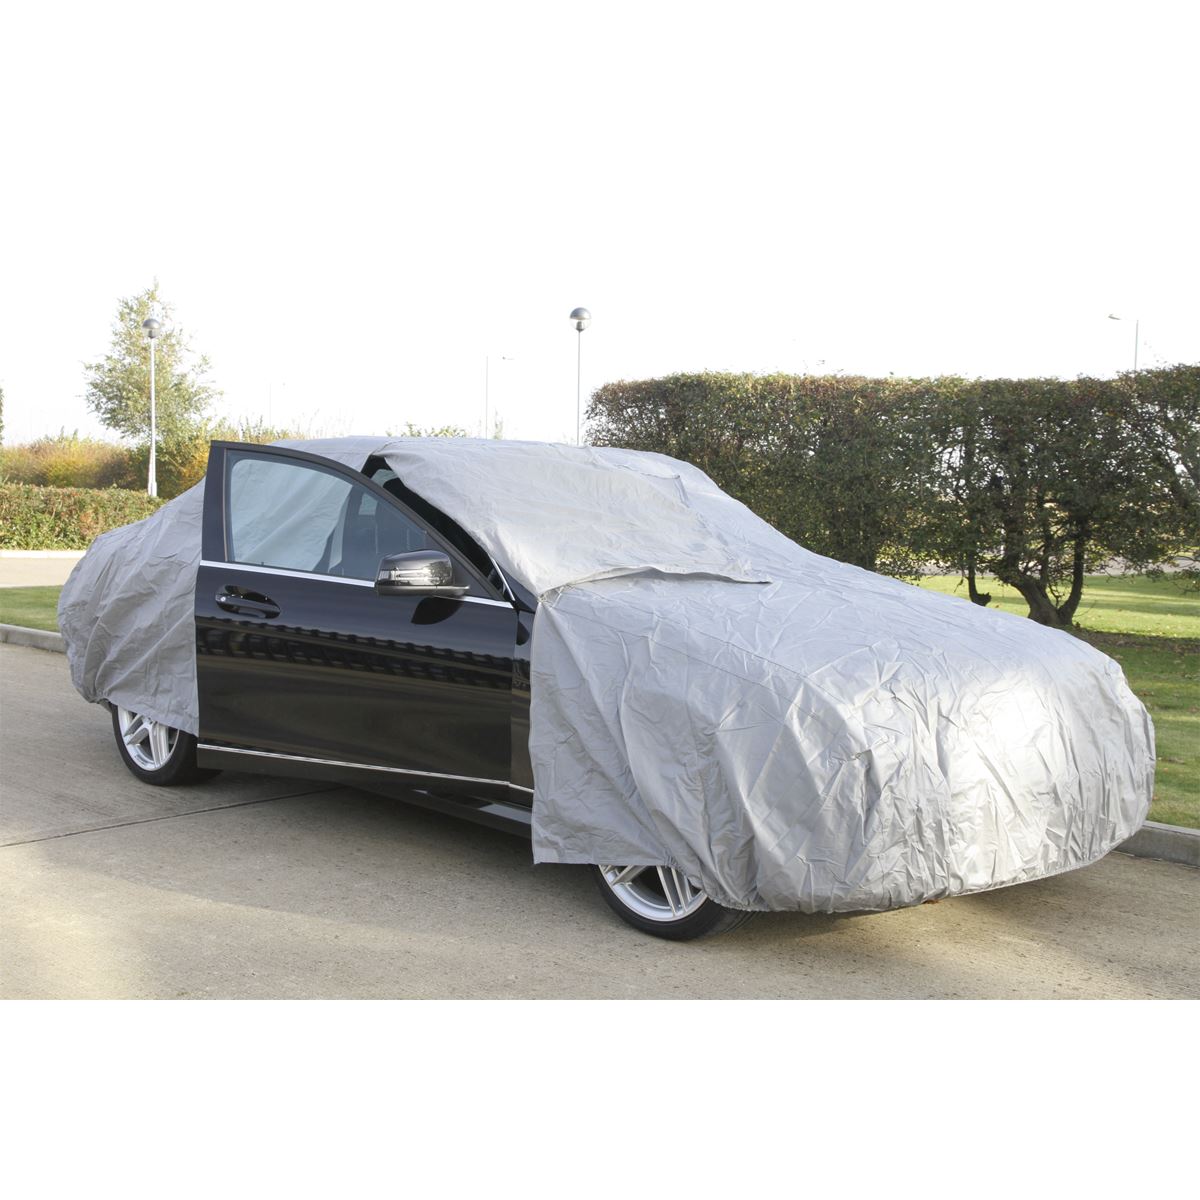 Sealey Car Cover Small 3800 x 1540 x 1190mm